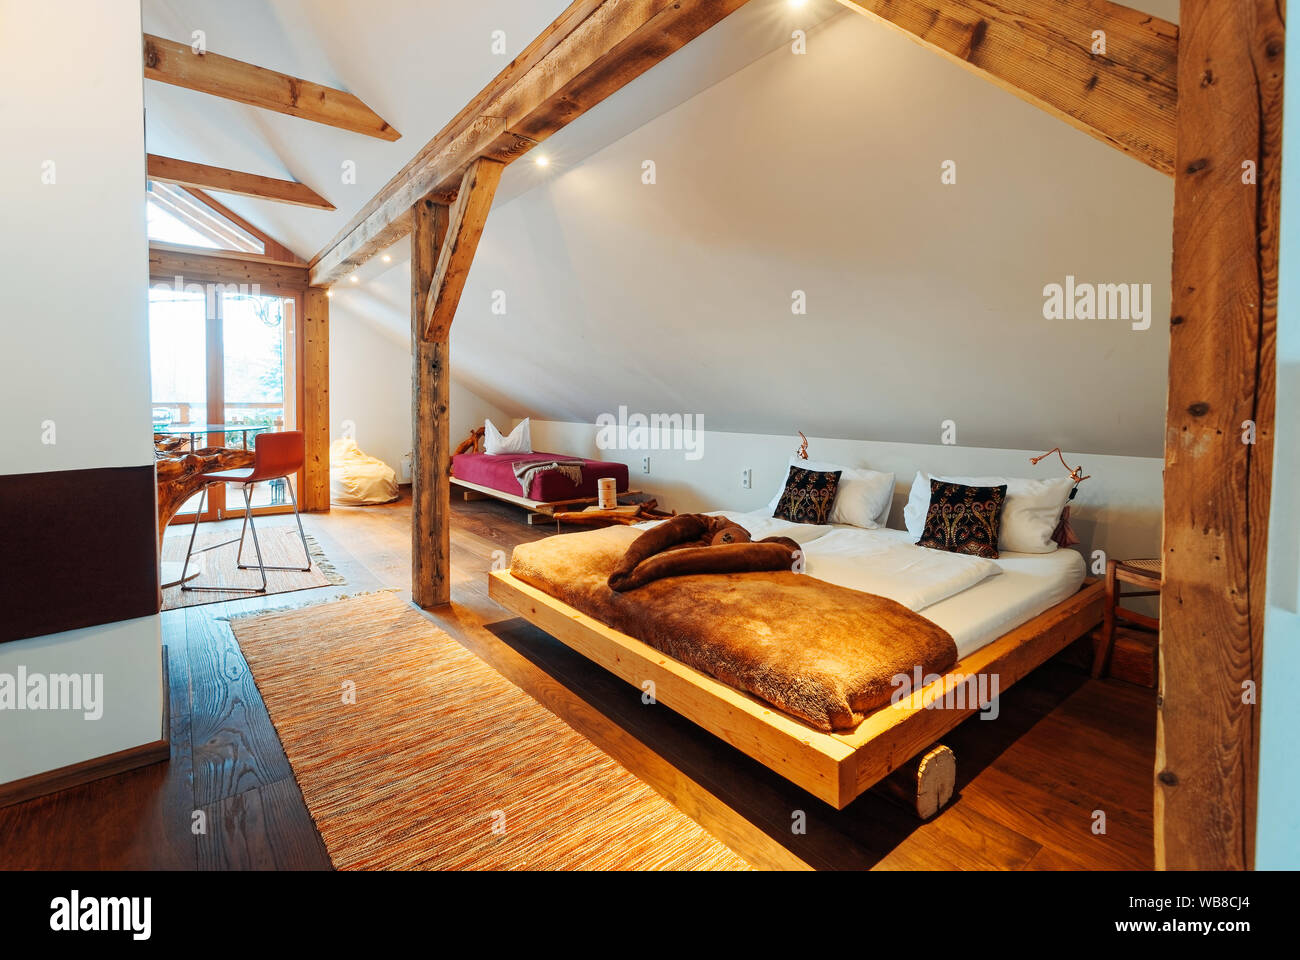 Interior With Bedroom Modern Wood Design Of Bed Wooden